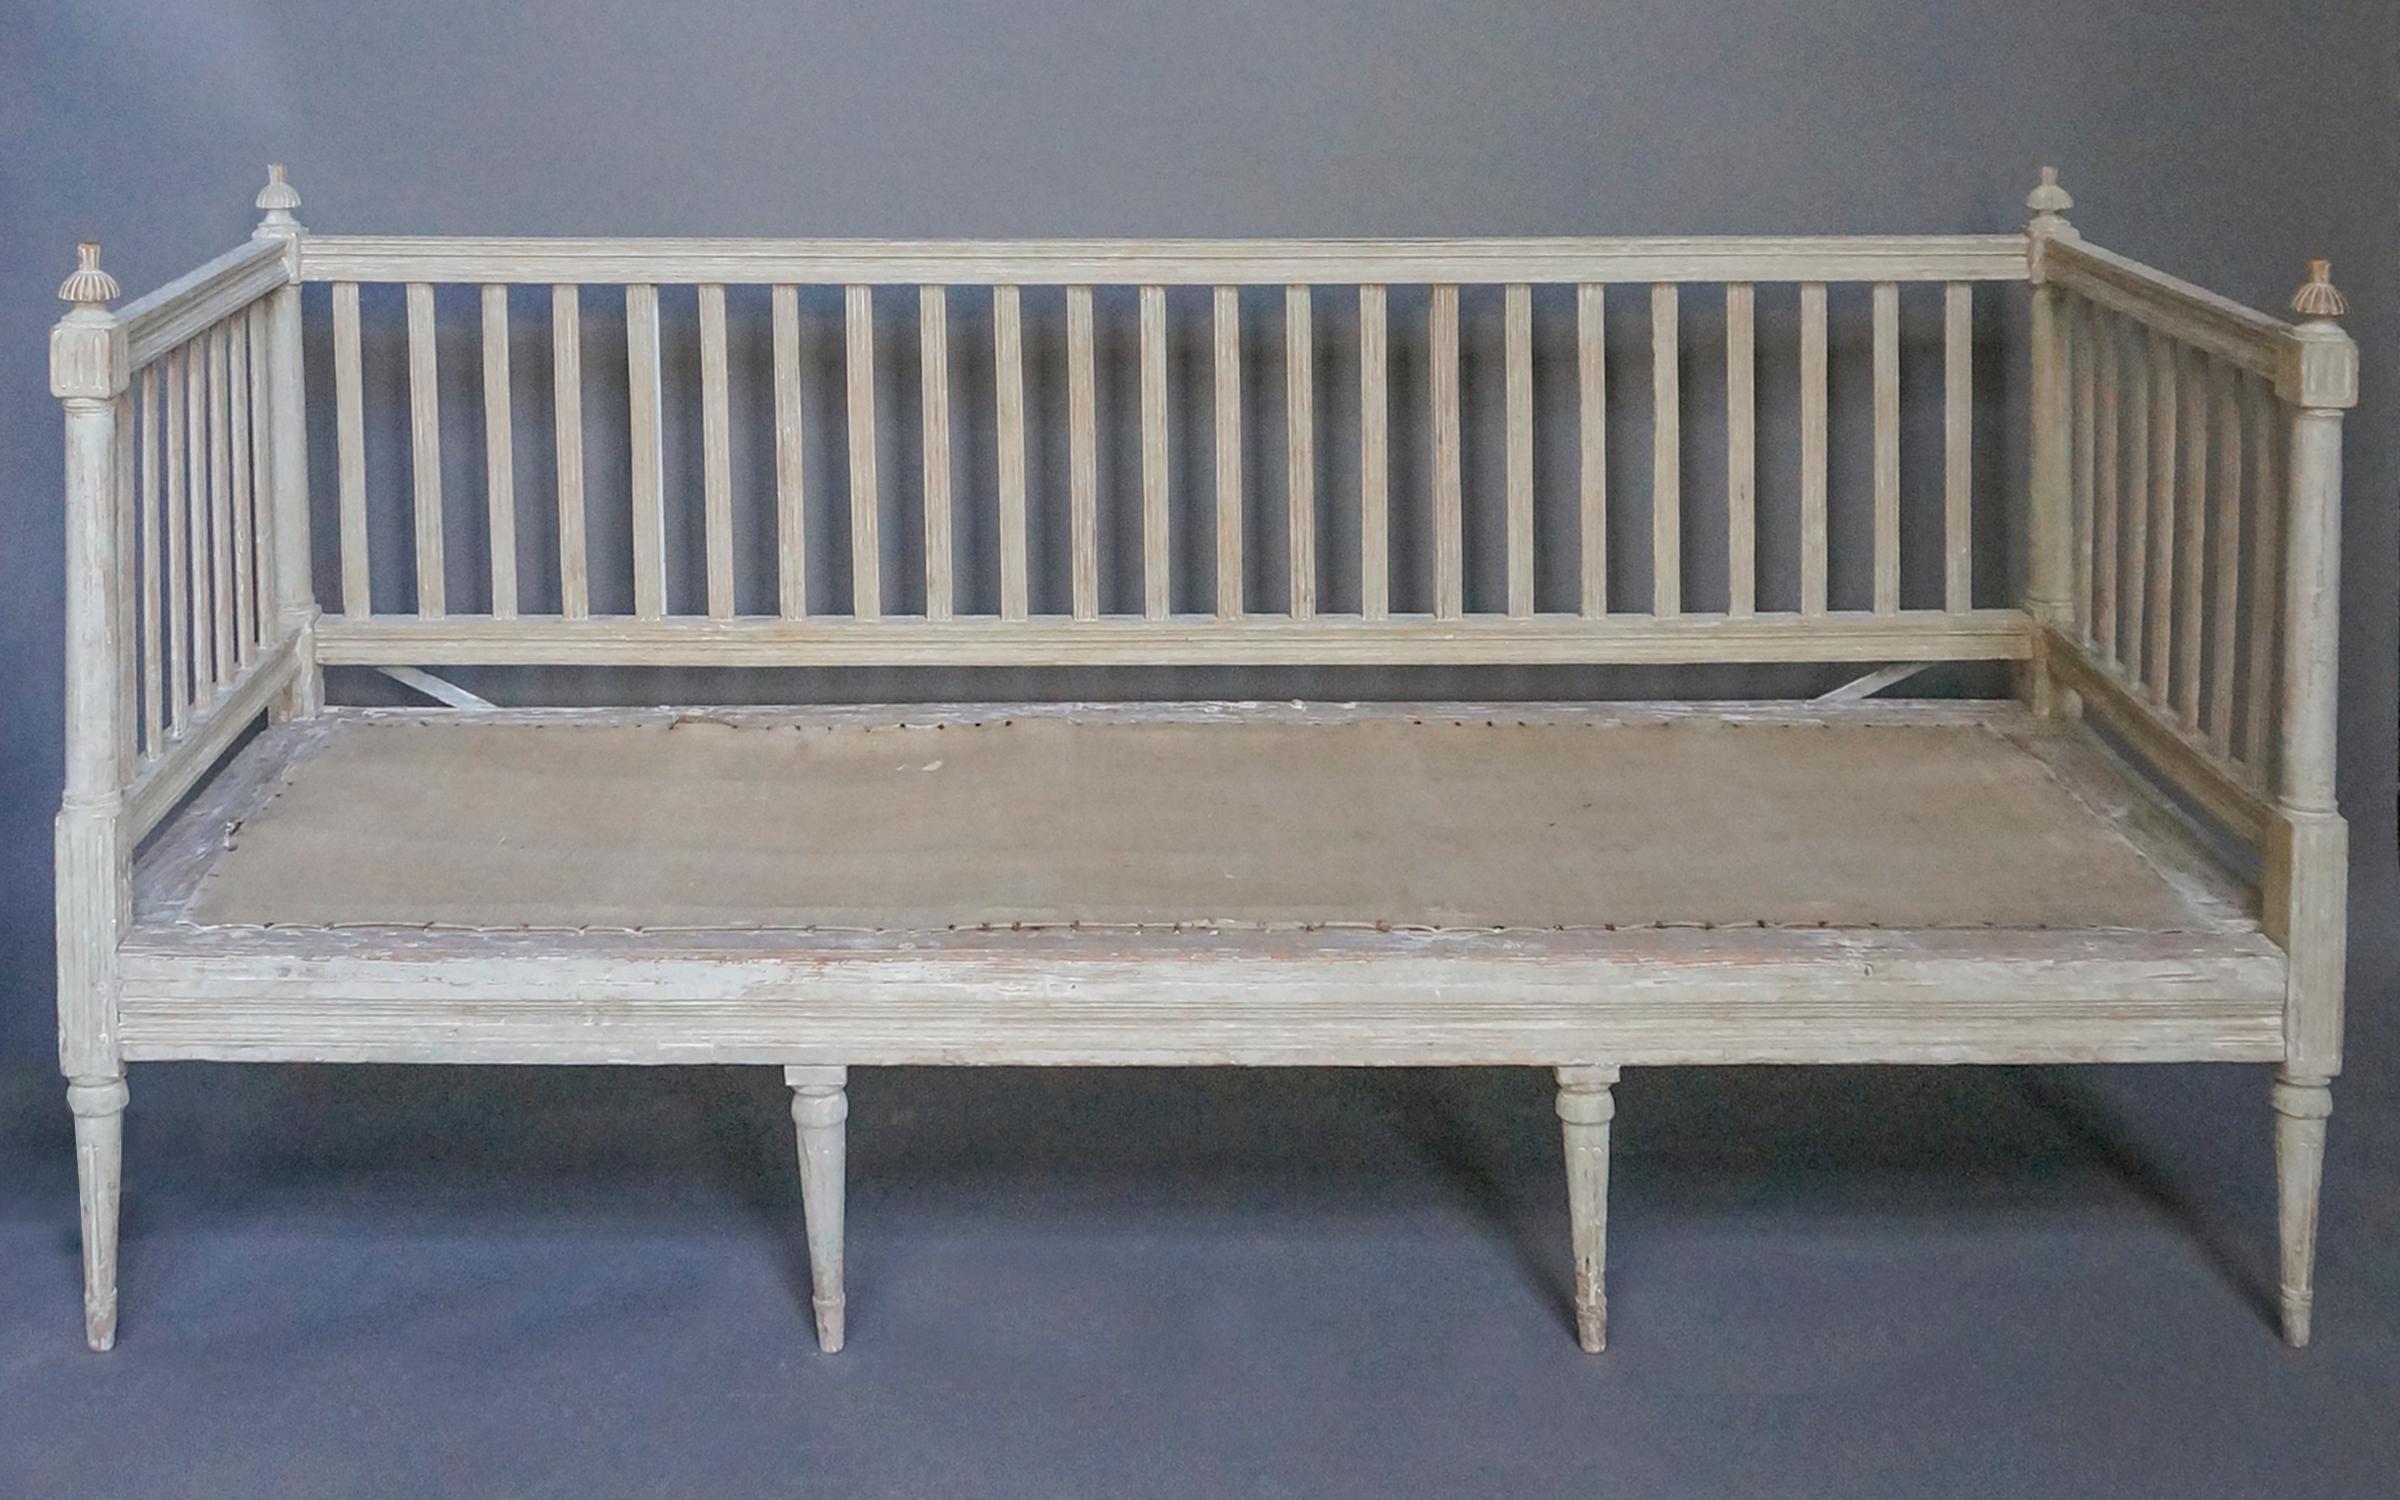 Gustavian sofa, Sweden circa 1790, in original paint. Baluster back and sides with turned finials and reeded corner blocks. Molded rails and turned legs, and original painted surface. Includes new tufted cushion.